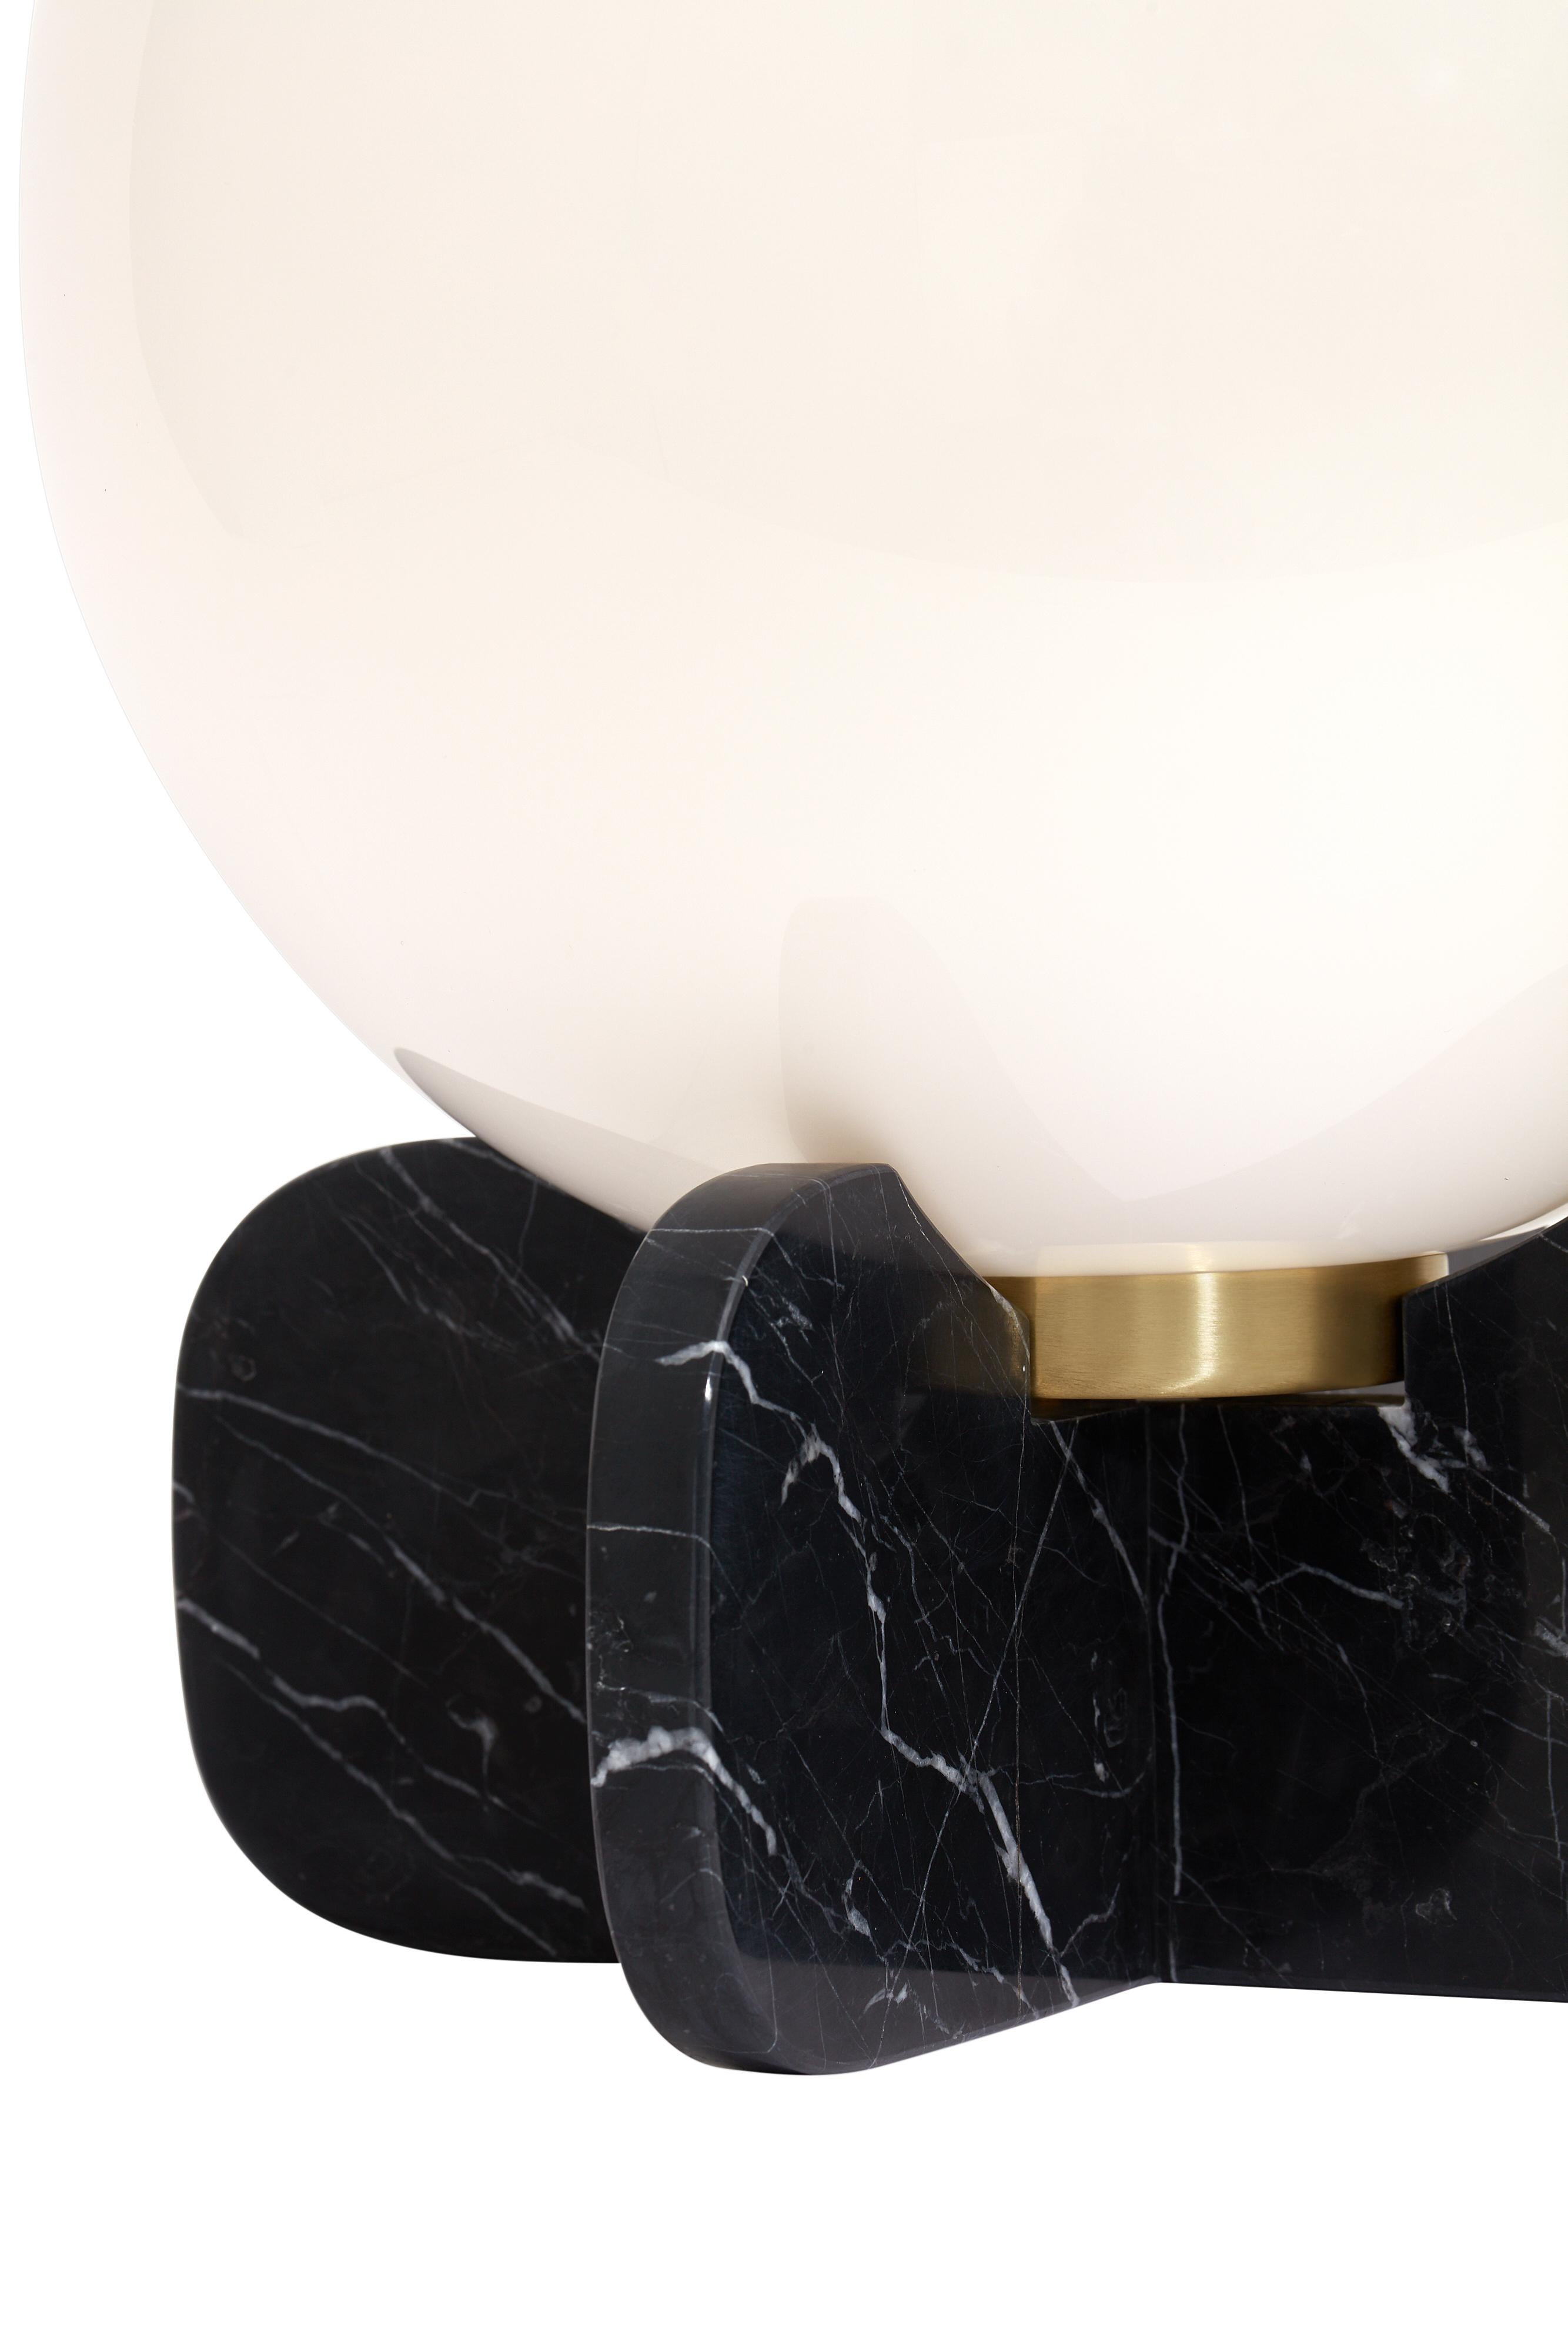 Marble Chelsea Table Lamp by CTO Lighting